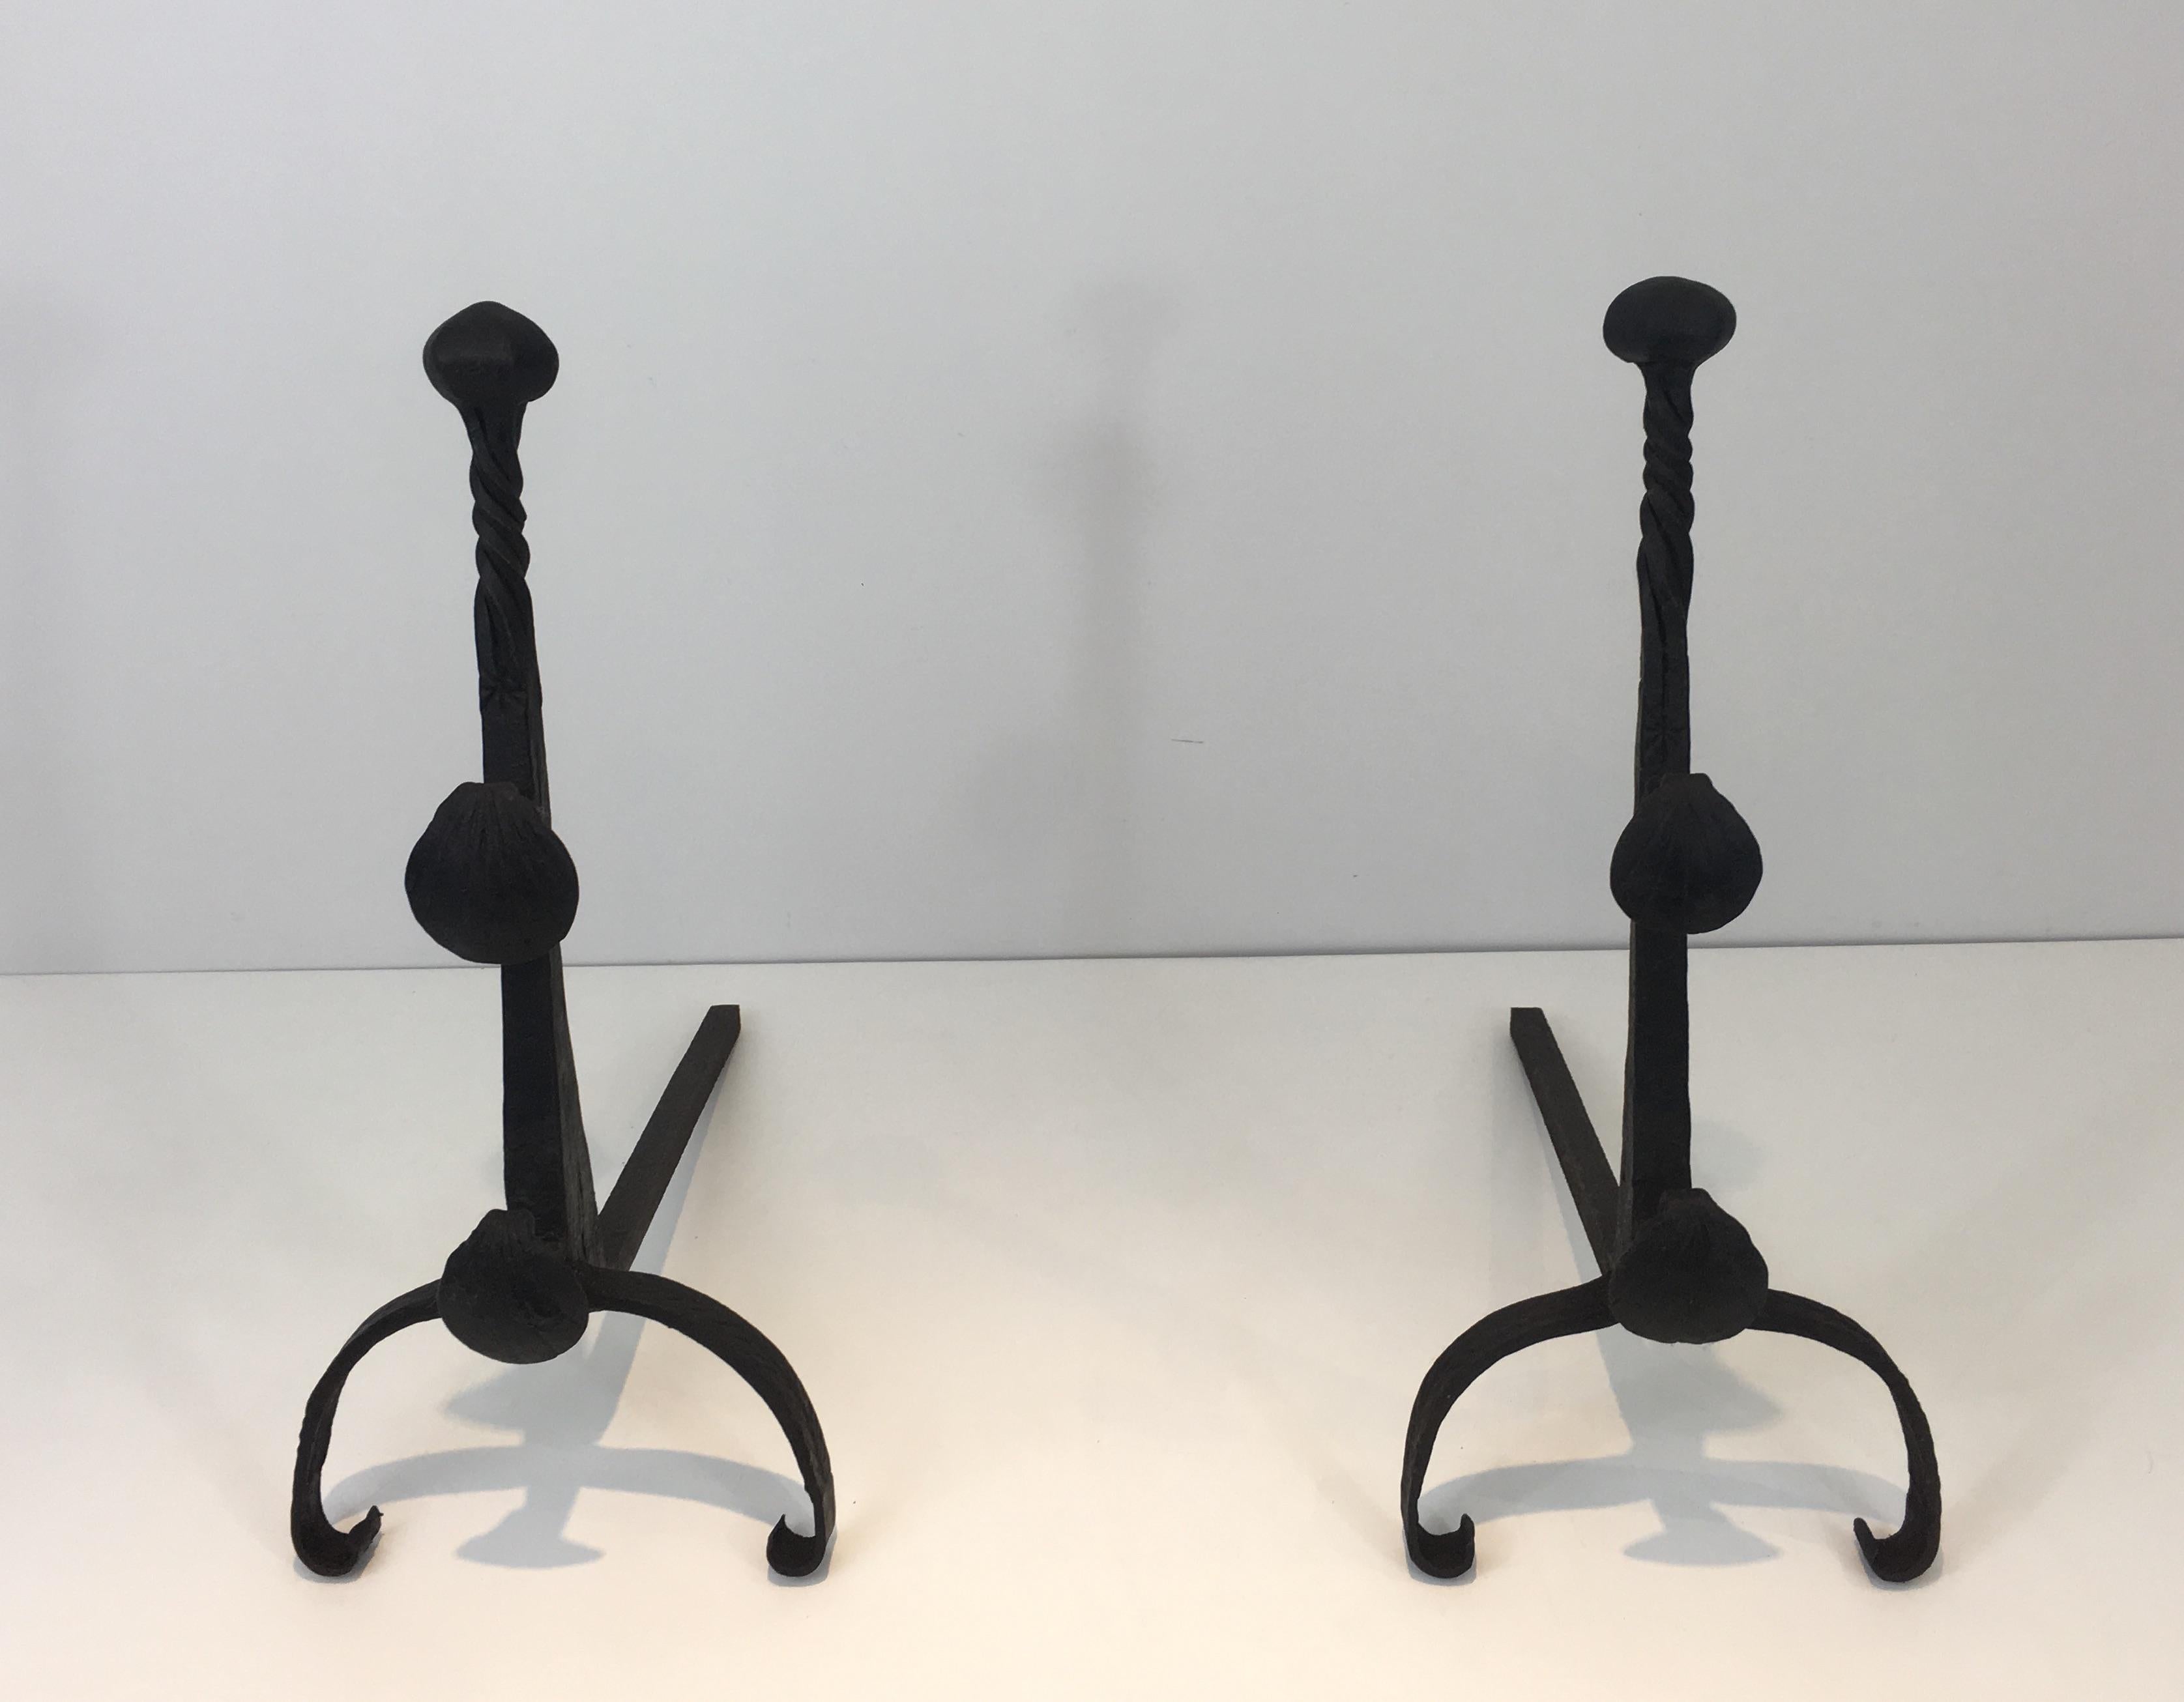 Pair of Wrought Iron Andirons with Double Bars, French, 19th Century For Sale 1